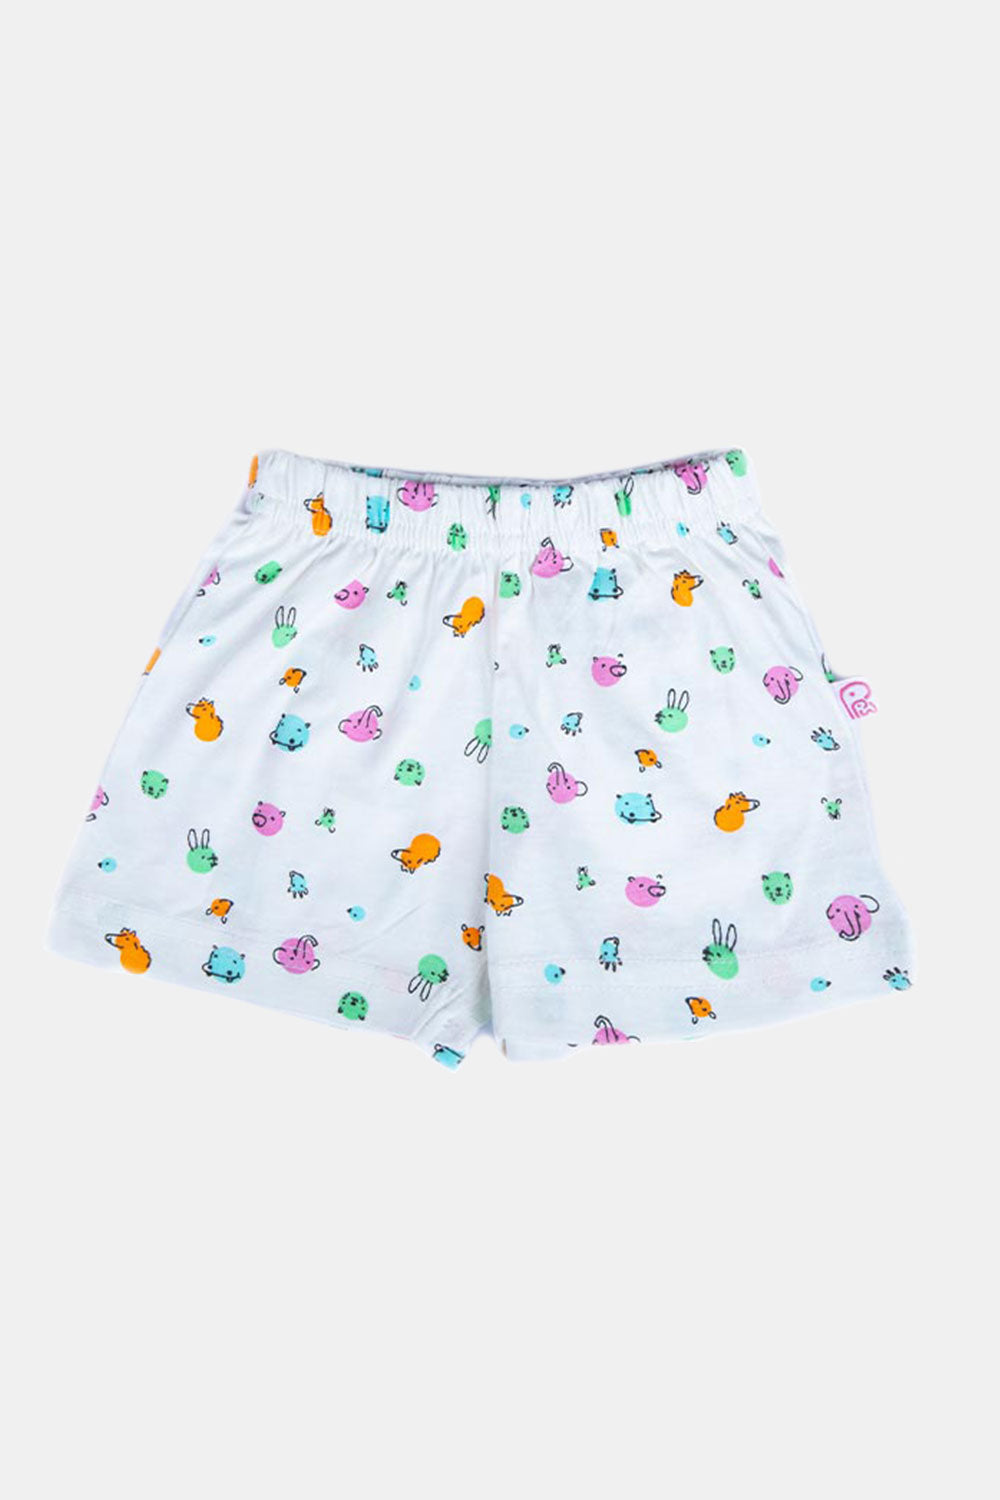 Oh Baby Bubble Print - Shorts SH01 Size   0m-3m Color Off White